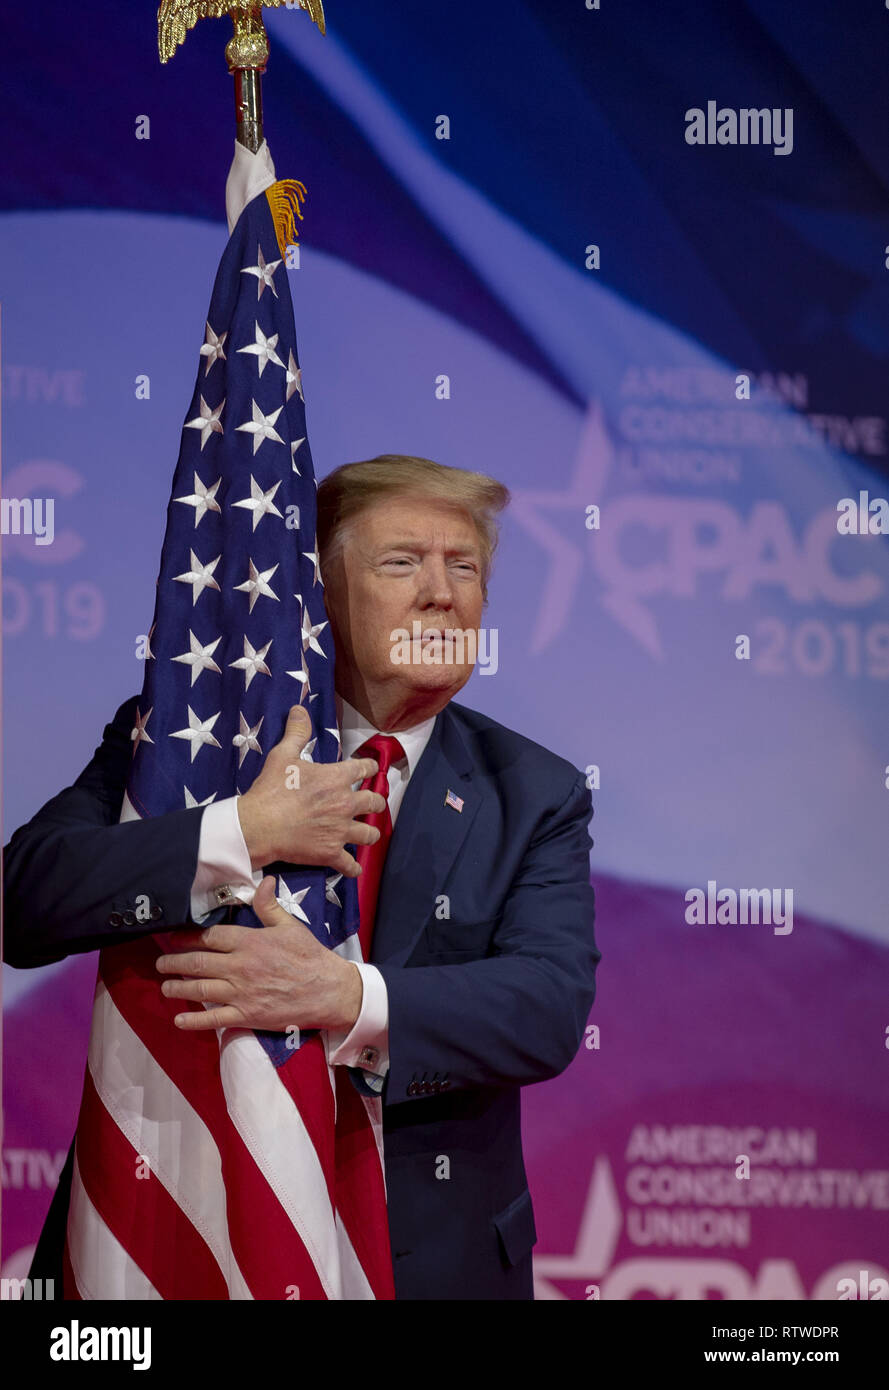 https://c8.alamy.com/comp/RTWDPR/us-president-donald-trump-hugs-the-us-flag-during-cpac-2019-on-march-02-2019-in-washington-dc-the-american-conservative-union-hosts-the-annual-conservative-political-action-conference-to-discuss-conservative-agenda-credit-tasos-katopodispool-via-cnpmediapunch-RTWDPR.jpg